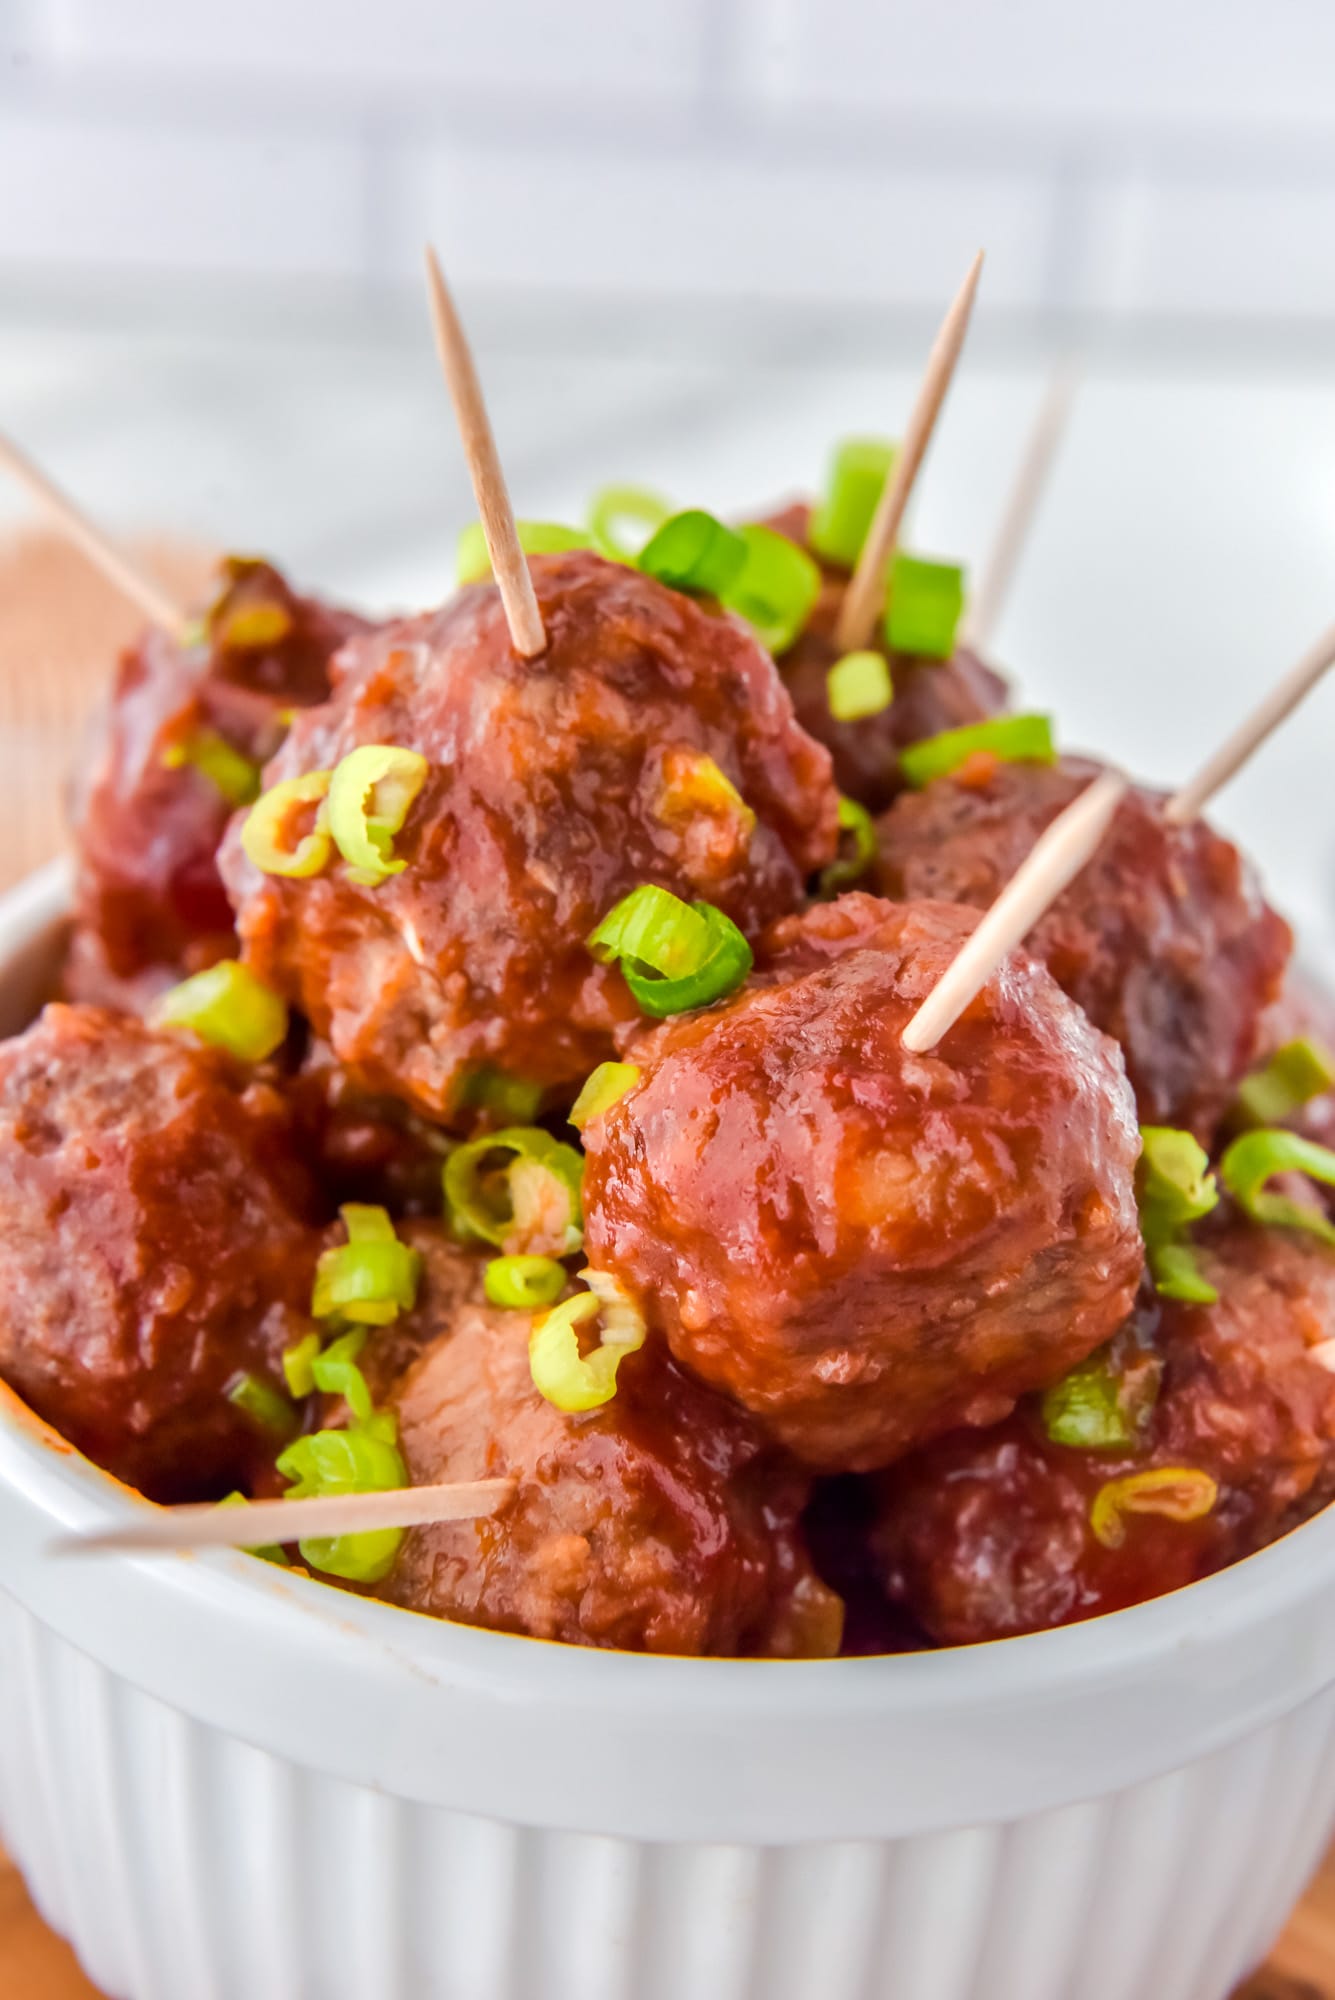 Cranberry meatballs with toothpicks inserted, and garnished with sliced green onions. Served in a white dish.